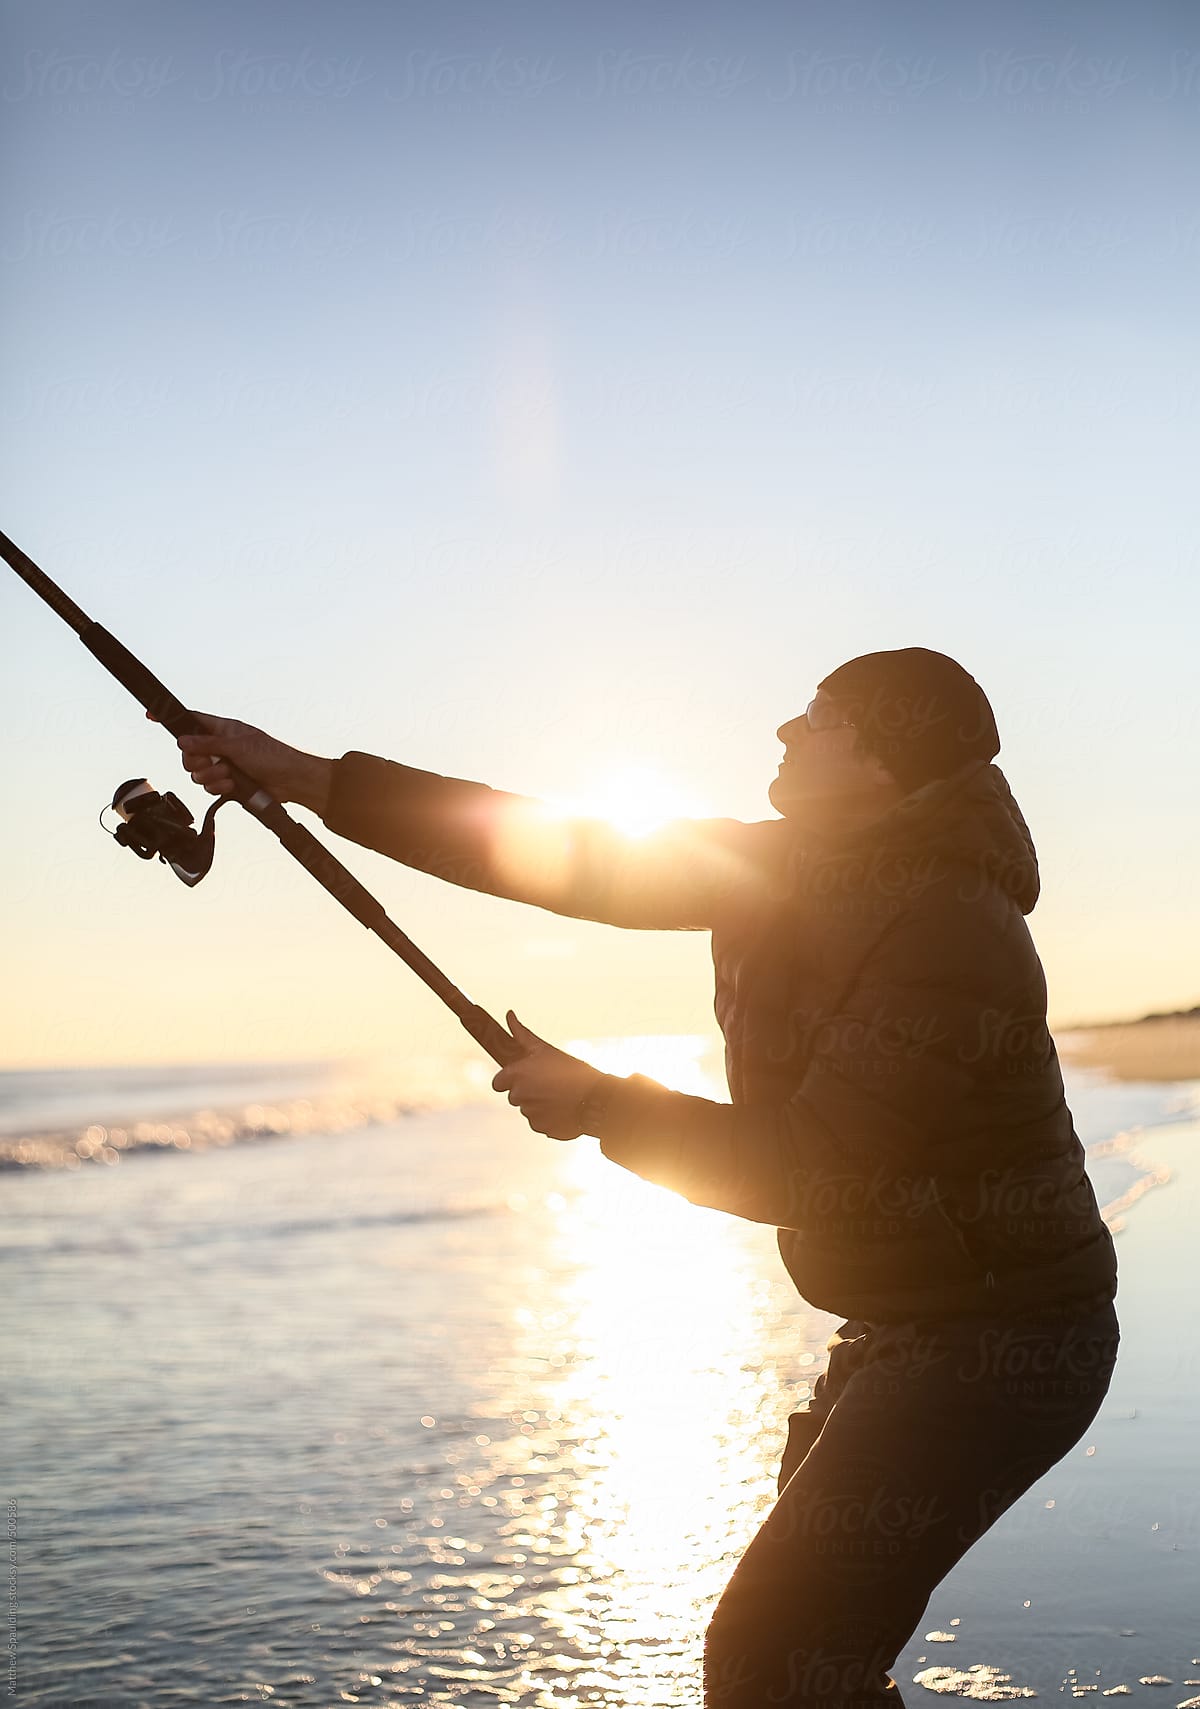 Person Casting Fishing Pole To Catch Surf Fish On Atlantic Ocean Beach by  Stocksy Contributor Matthew Spaulding - Stocksy